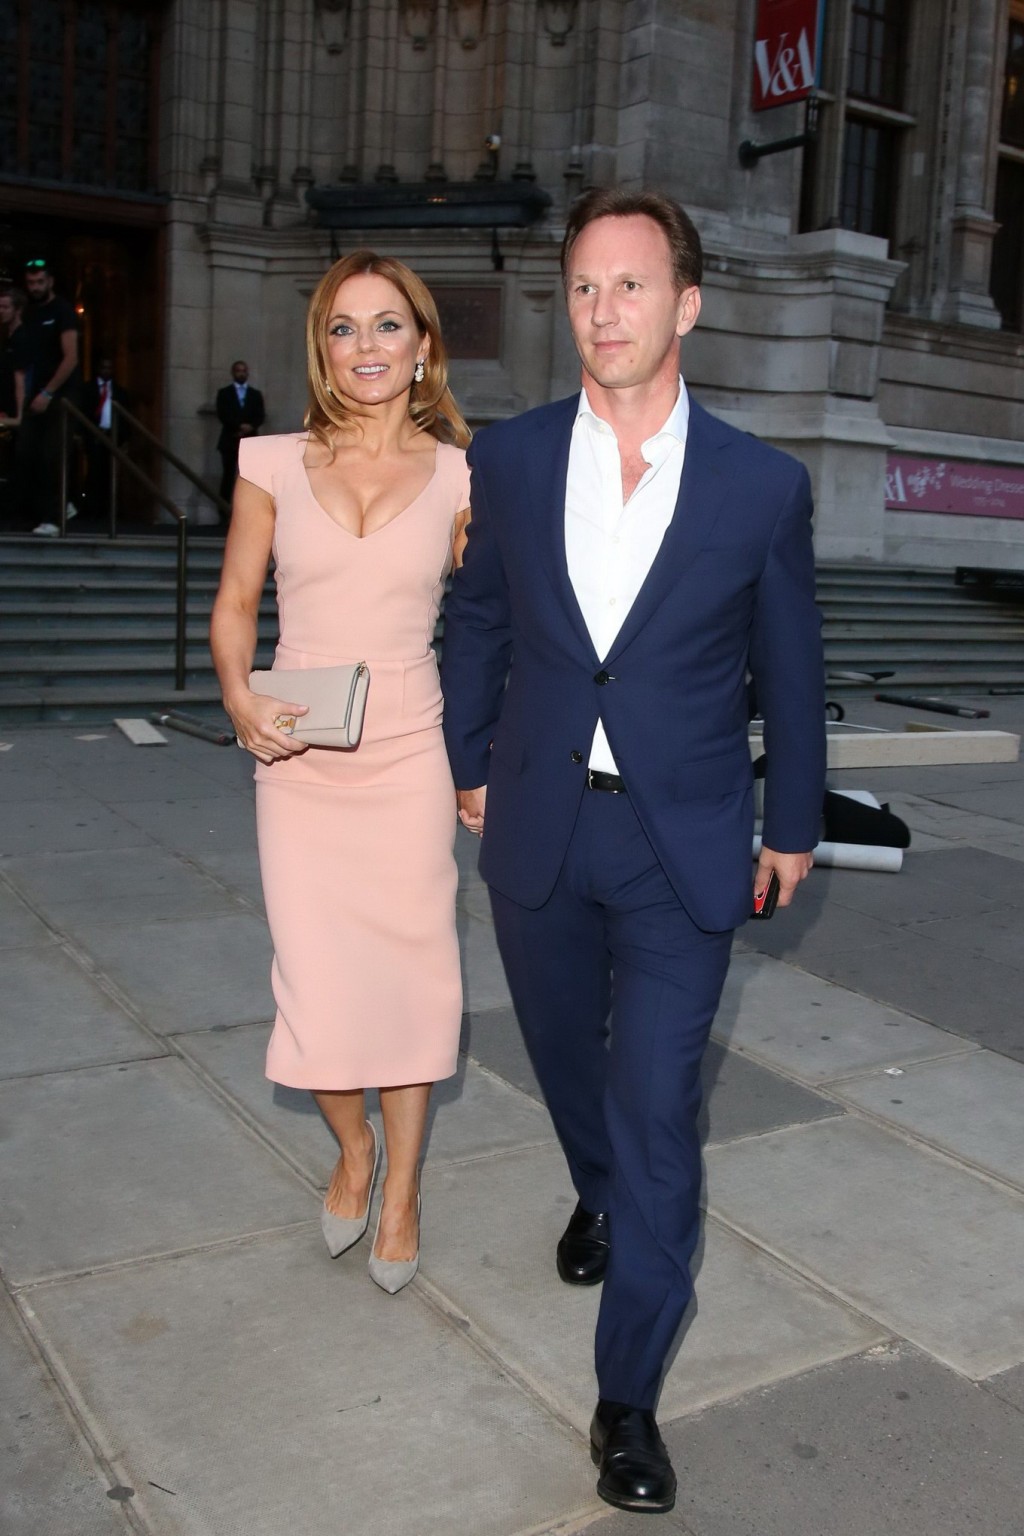 Geri Halliwell showing huge cleavage at the F1 Ormond Street Charity Event in UK #75191866